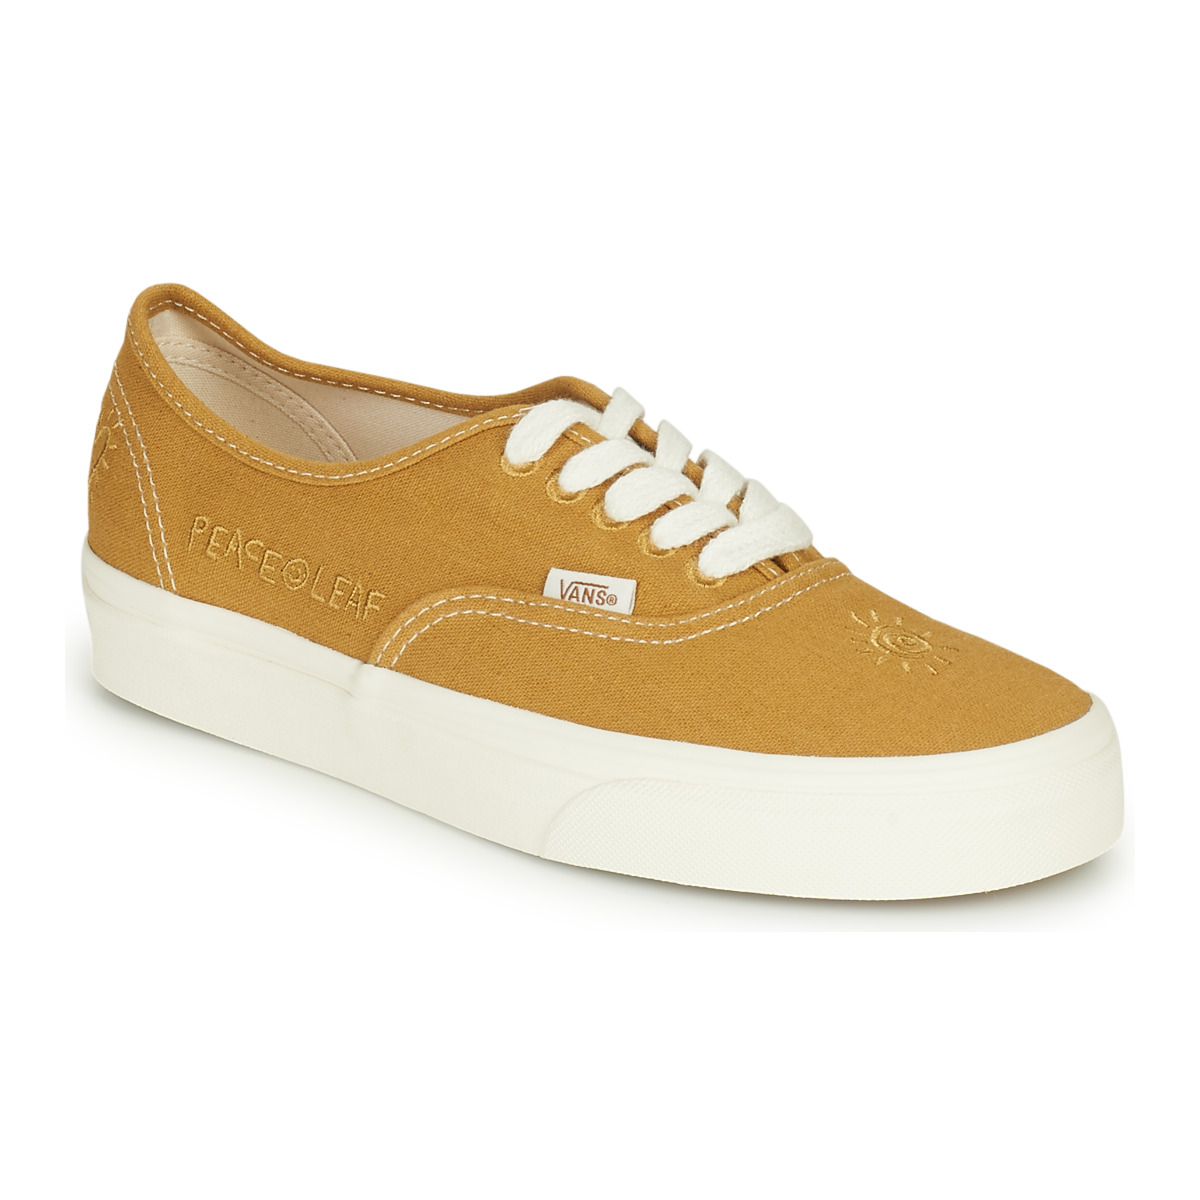 Chaussures Baskets basses Vans AUTHENTIC ECO THEORY 